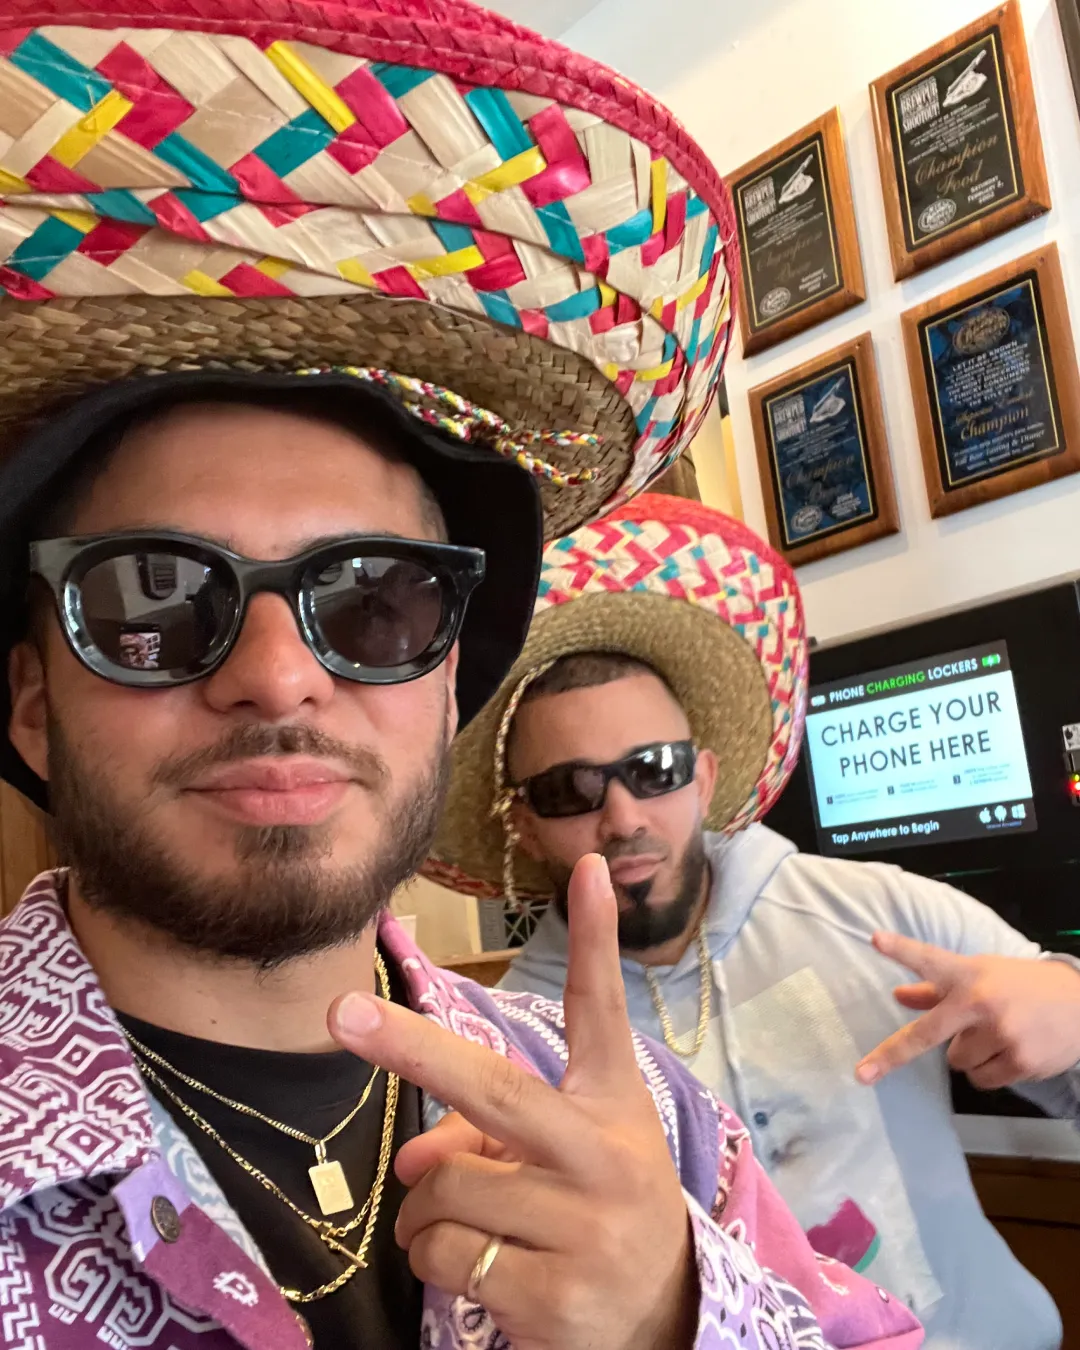 Elated friends in matching sombreros, pose for a selfie and take in the energy of the tacos and tequila bar event